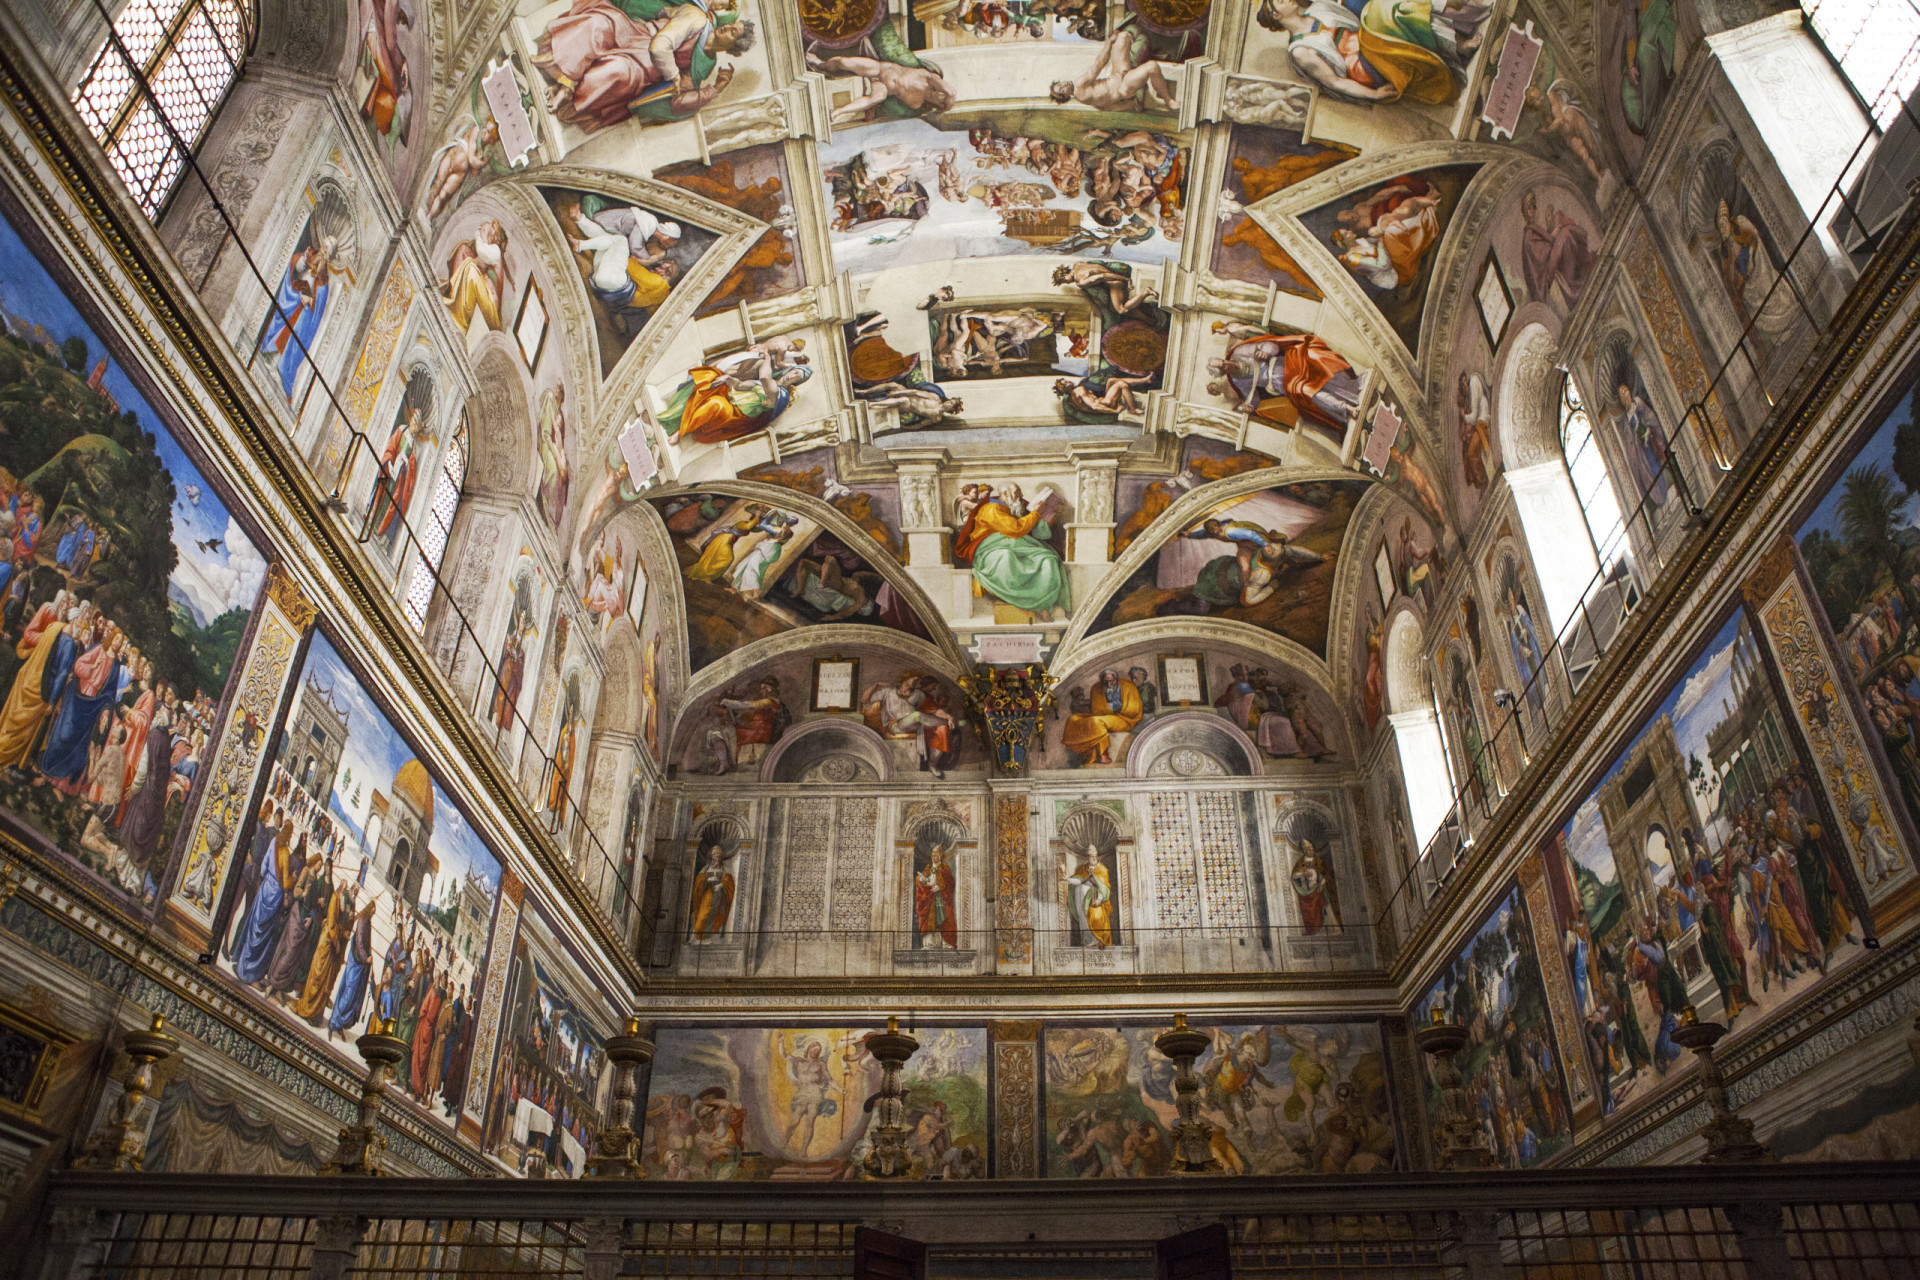 <p>The chapel, famous for Michelangelo's ceiling frescoes, will experience temporary closures for maintenance. These efforts are crucial to preserving the vibrancy and detail of the Renaissance artwork, safeguarding this priceless cultural treasure.</p><p>You may also like:<a href="https://www.starsinsider.com/n/446980?utm_source=msn.com&utm_medium=display&utm_campaign=referral_description&utm_content=646906en-us"> Stars who drive classic cars</a></p>